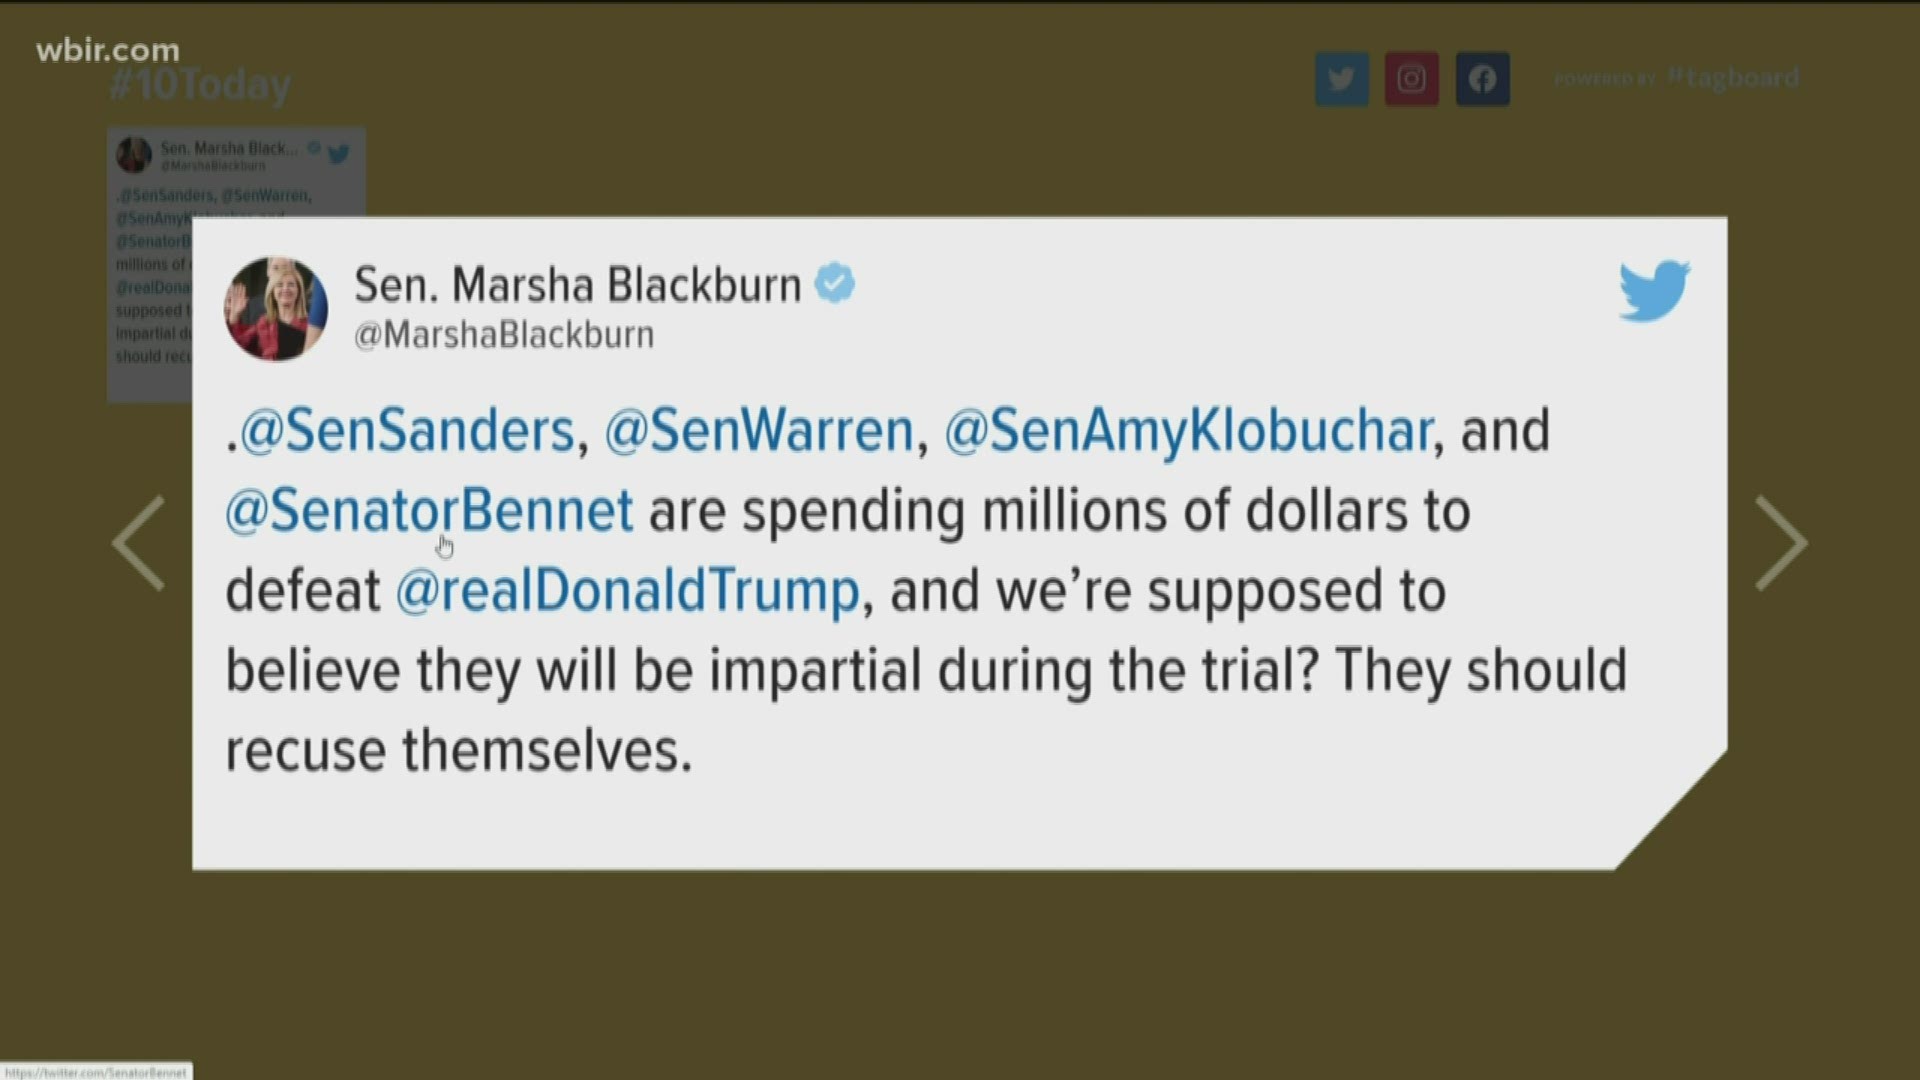 Tennessee Senator Marsha Blackburn posted a tweet that said four democratic candidates should recuse themselves from the impeachment process.